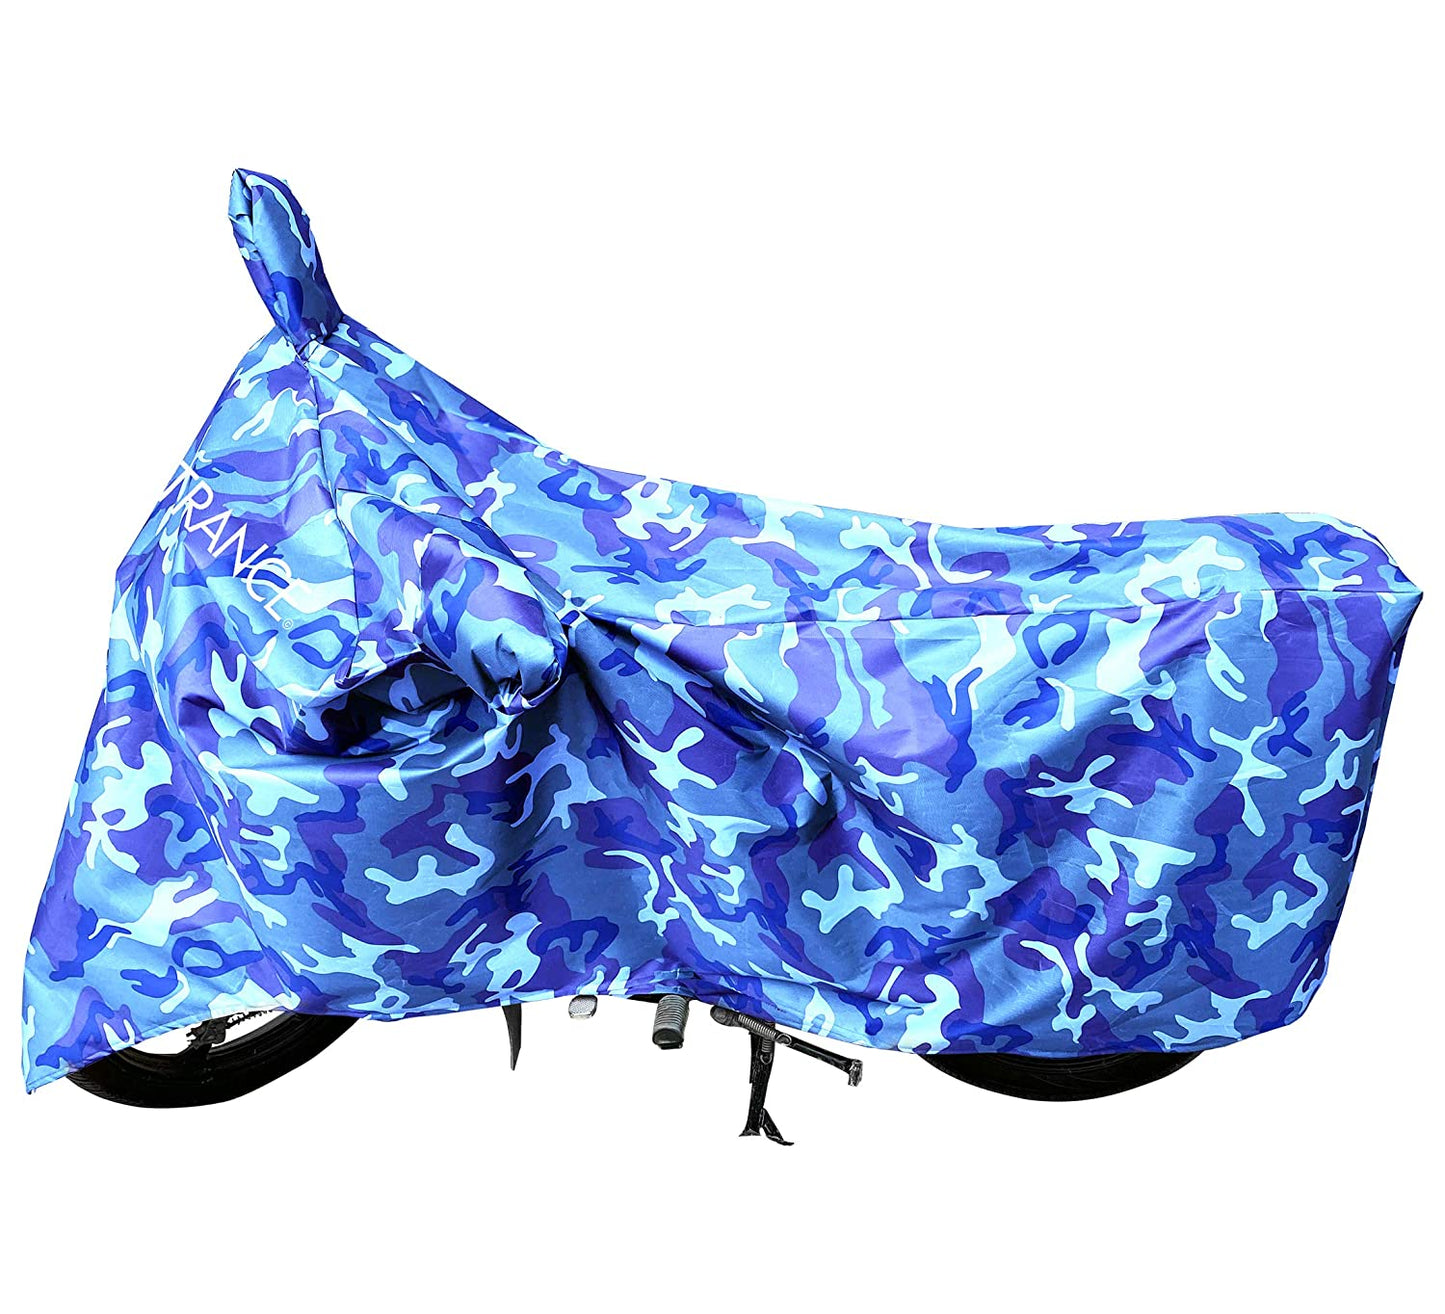 MotoTrance Jungle Bike Body Covers For Suzuki V Strom 1000 - Interlock-Stitched Waterproof and Heat Resistant with Mirror Pockets